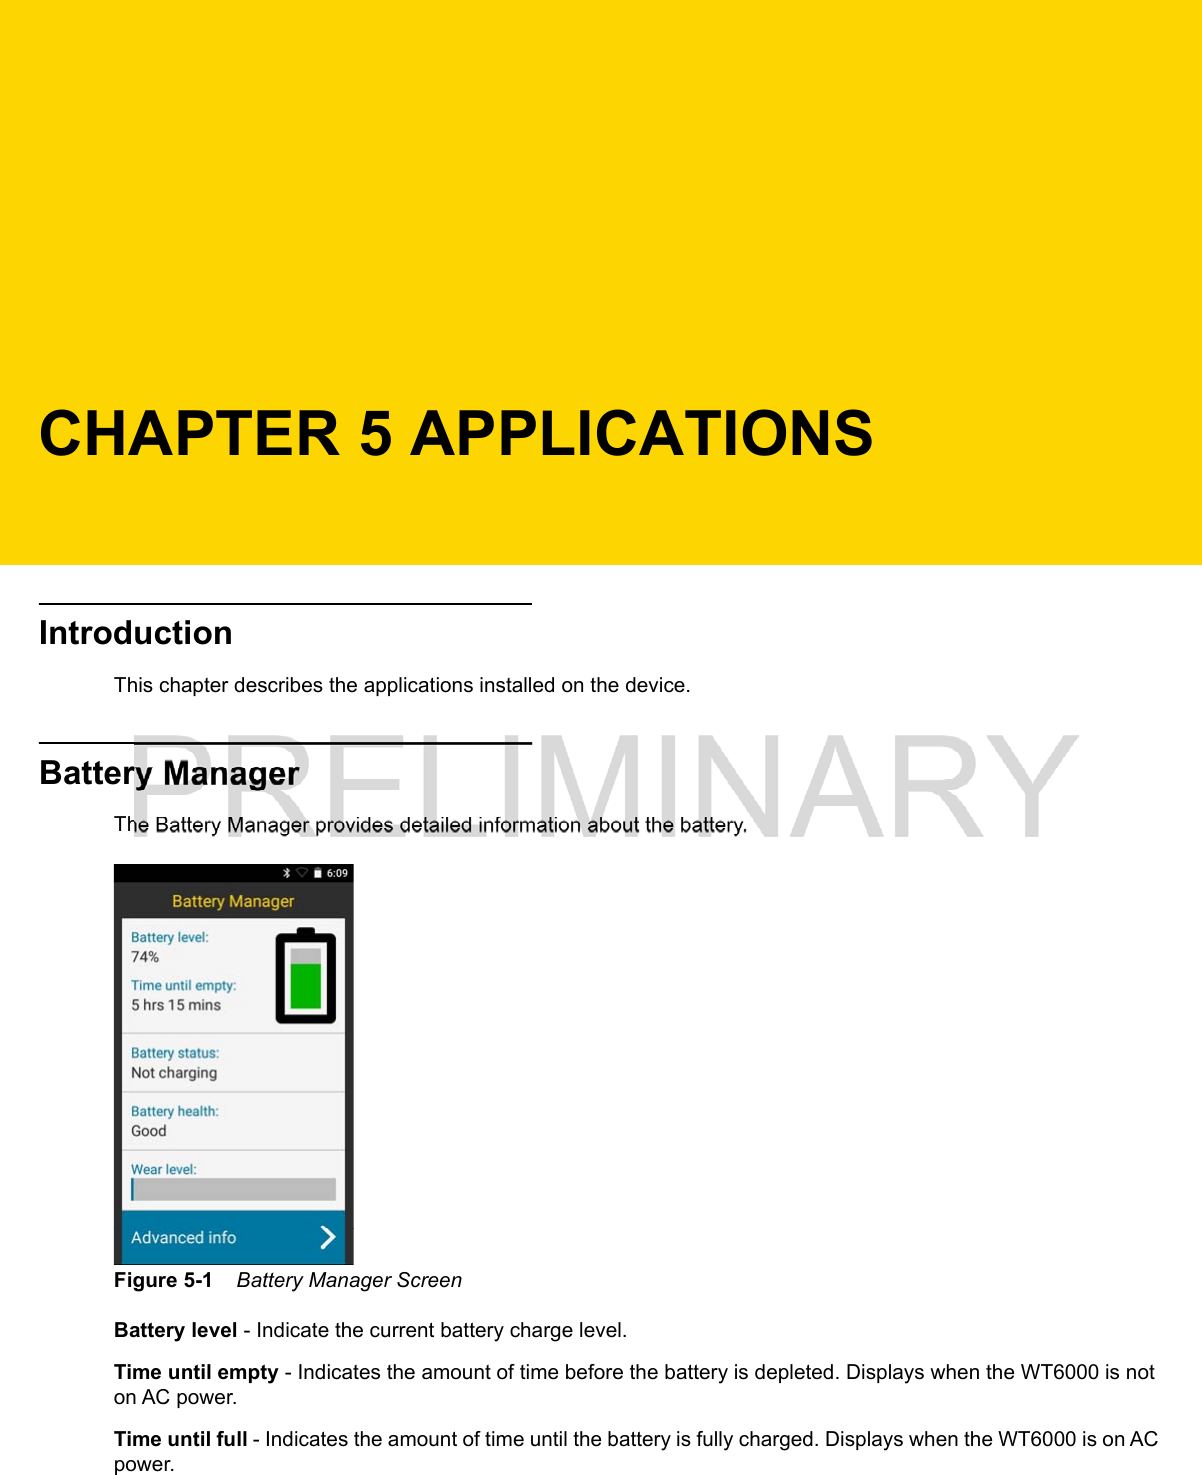 CHAPTER 5 APPLICATIONSIntroductionThis chapter describes the applications installed on the device.Battery ManagerThe Battery Manager provides detailed information about the battery.Figure 5-1    Battery Manager ScreenBattery level - Indicate the current battery charge level.Time until empty - Indicates the amount of time before the battery is depleted. Displays when the WT6000 is not on AC power.Time until full - Indicates the amount of time until the battery is fully charged. Displays when the WT6000 is on AC power.